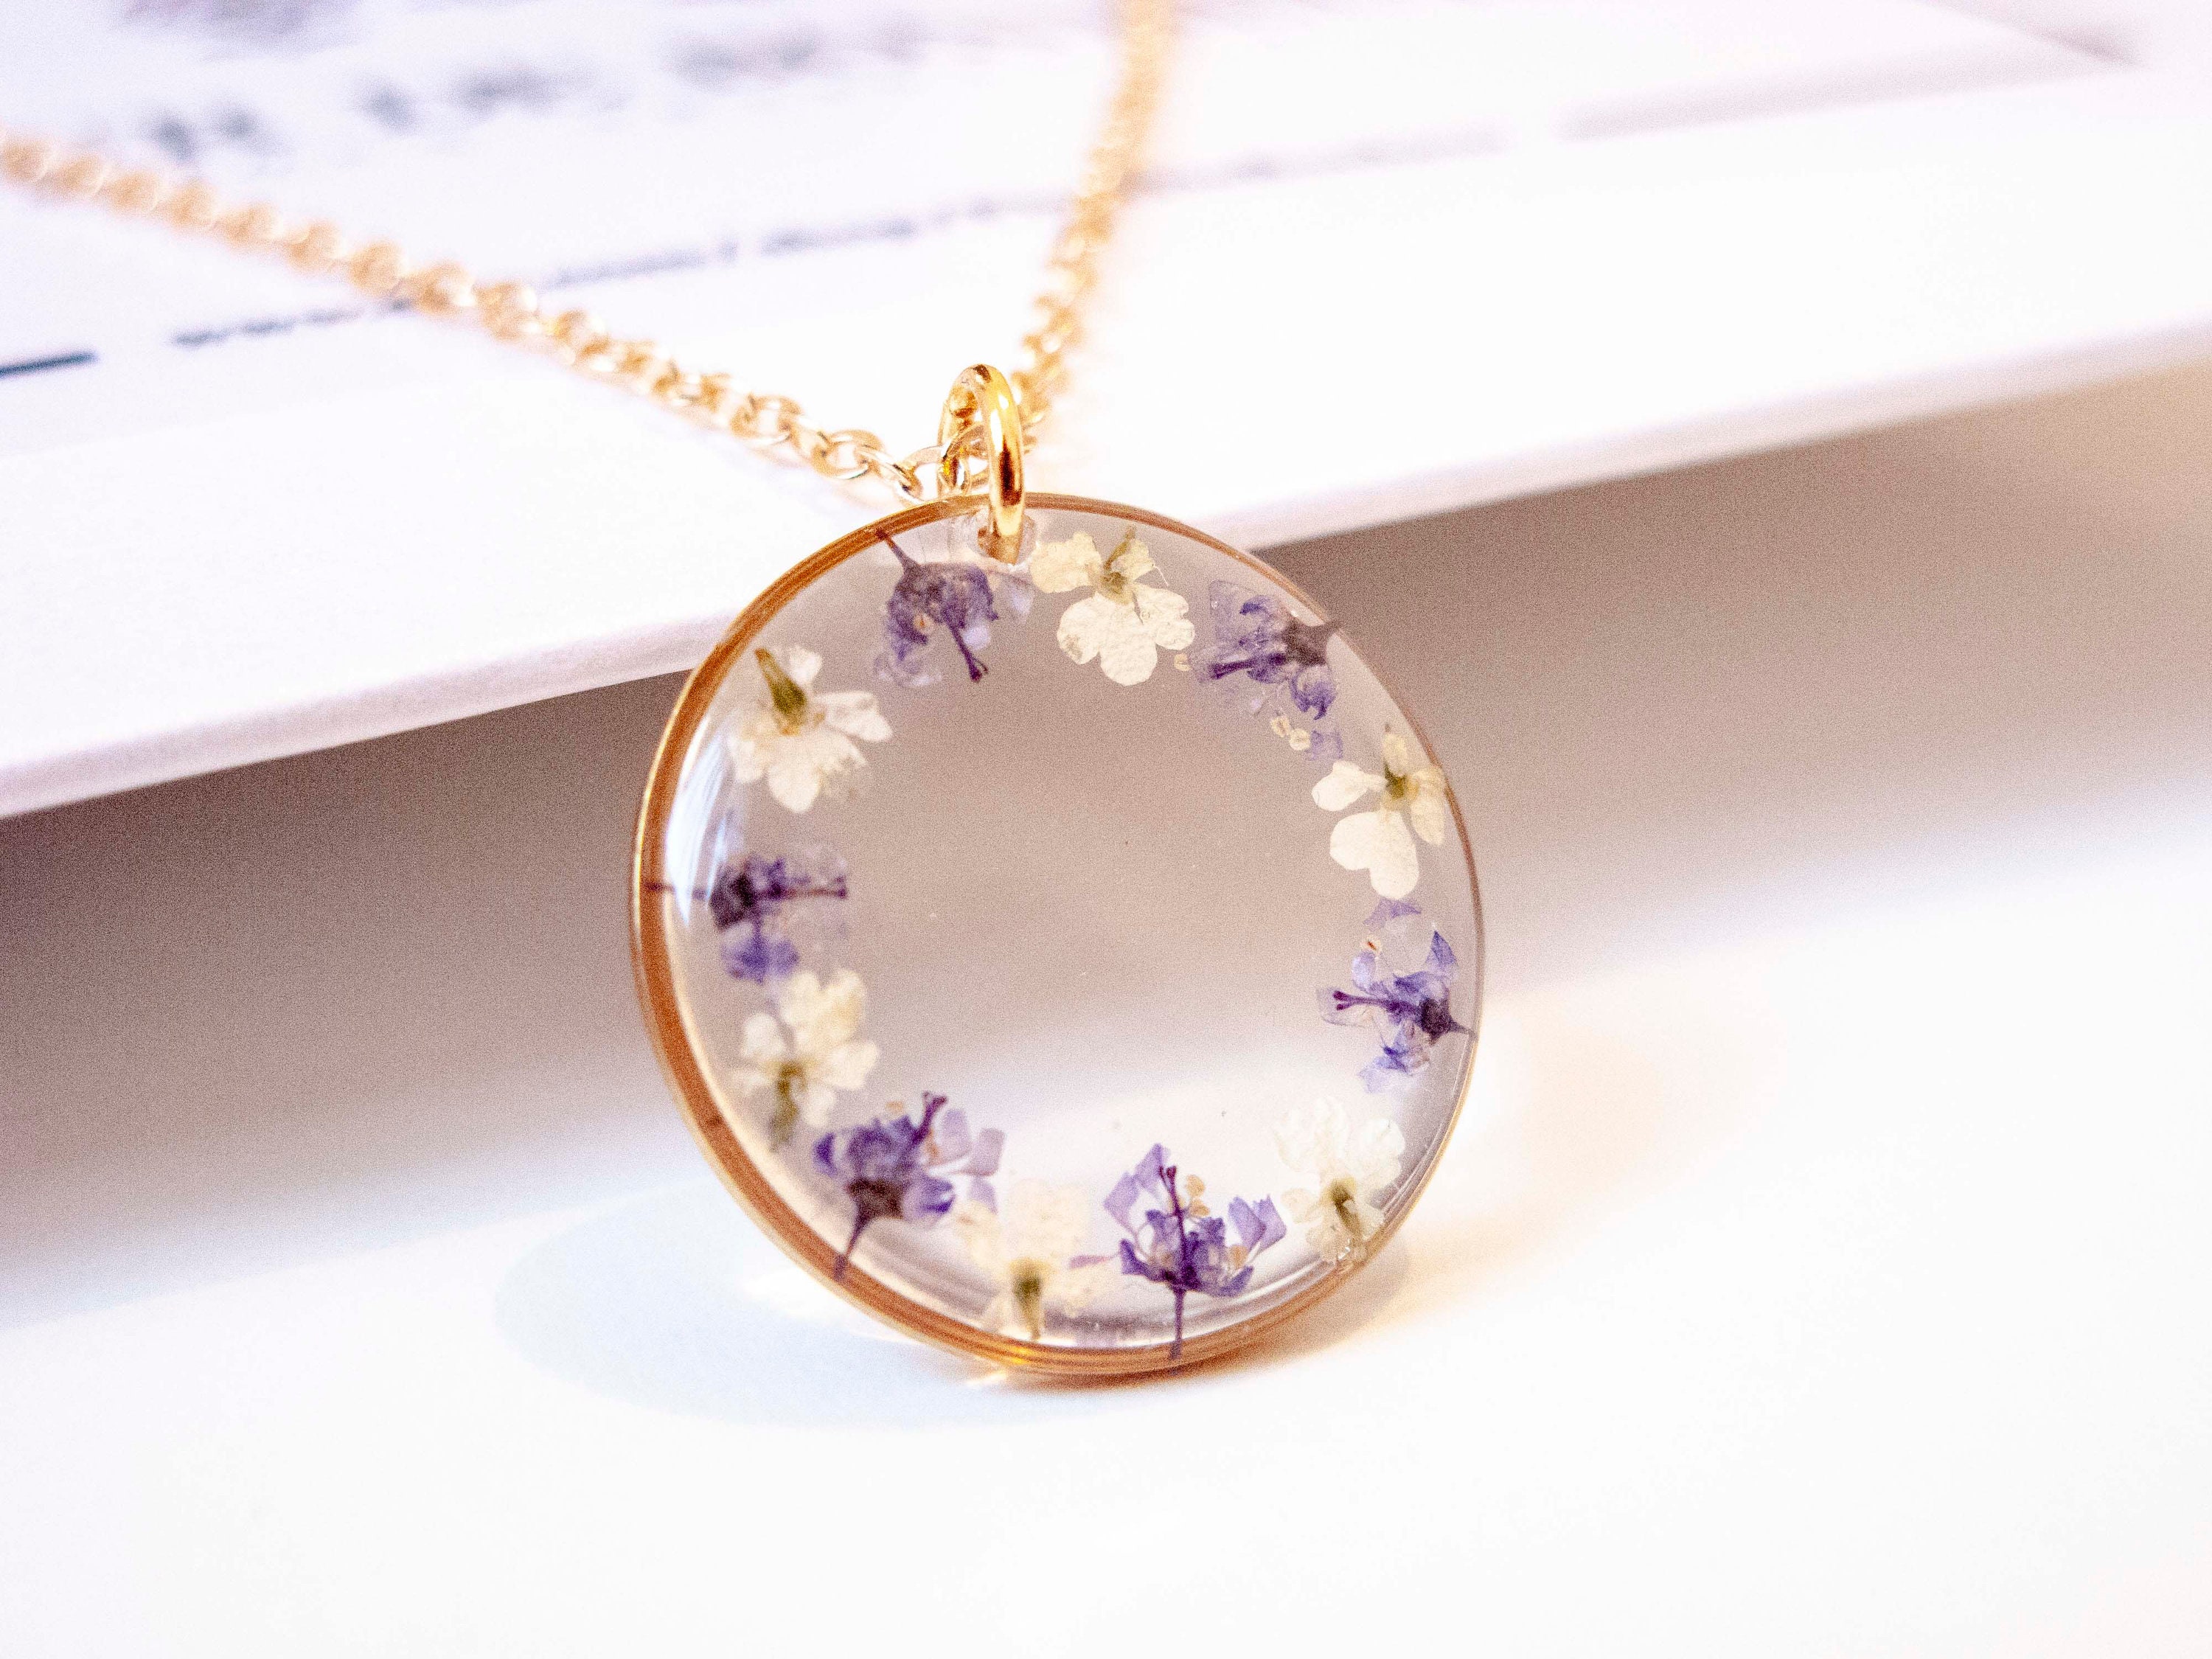 Birth Flower Necklace of January |Handmade Dry Carnation Flower Jewelry |Flower Resin Art| Customized Lover Gift, July / 16IN